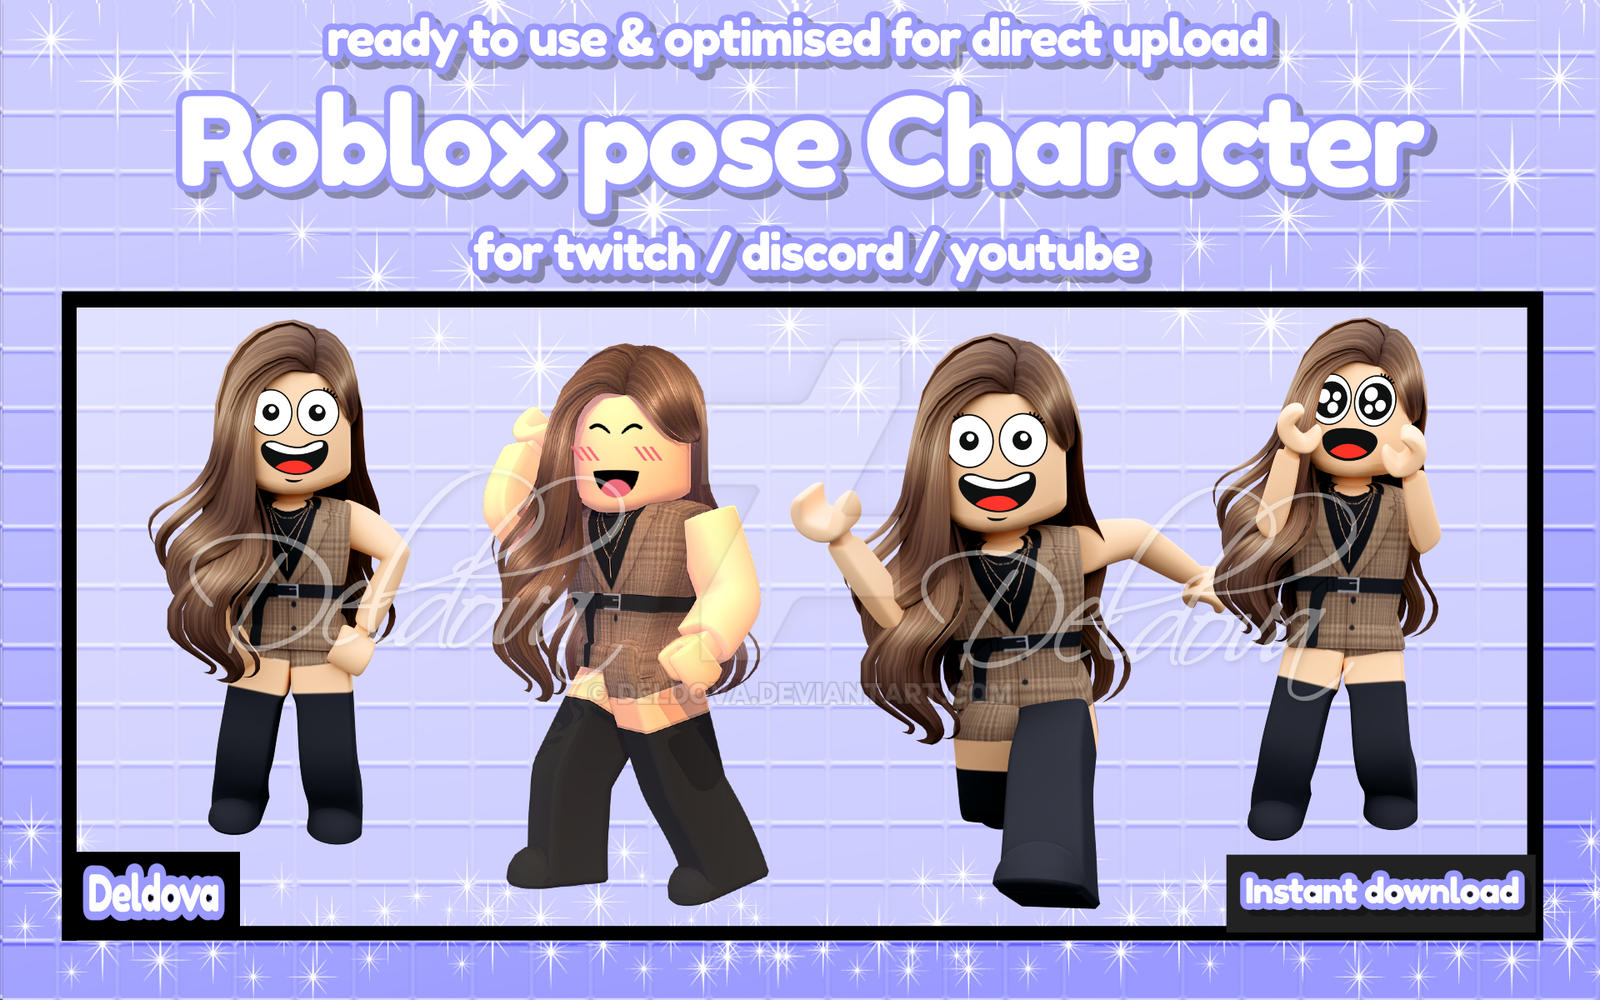 PACK 1] Roblox pose pack for twitch / Discord by DELDOVA on DeviantArt